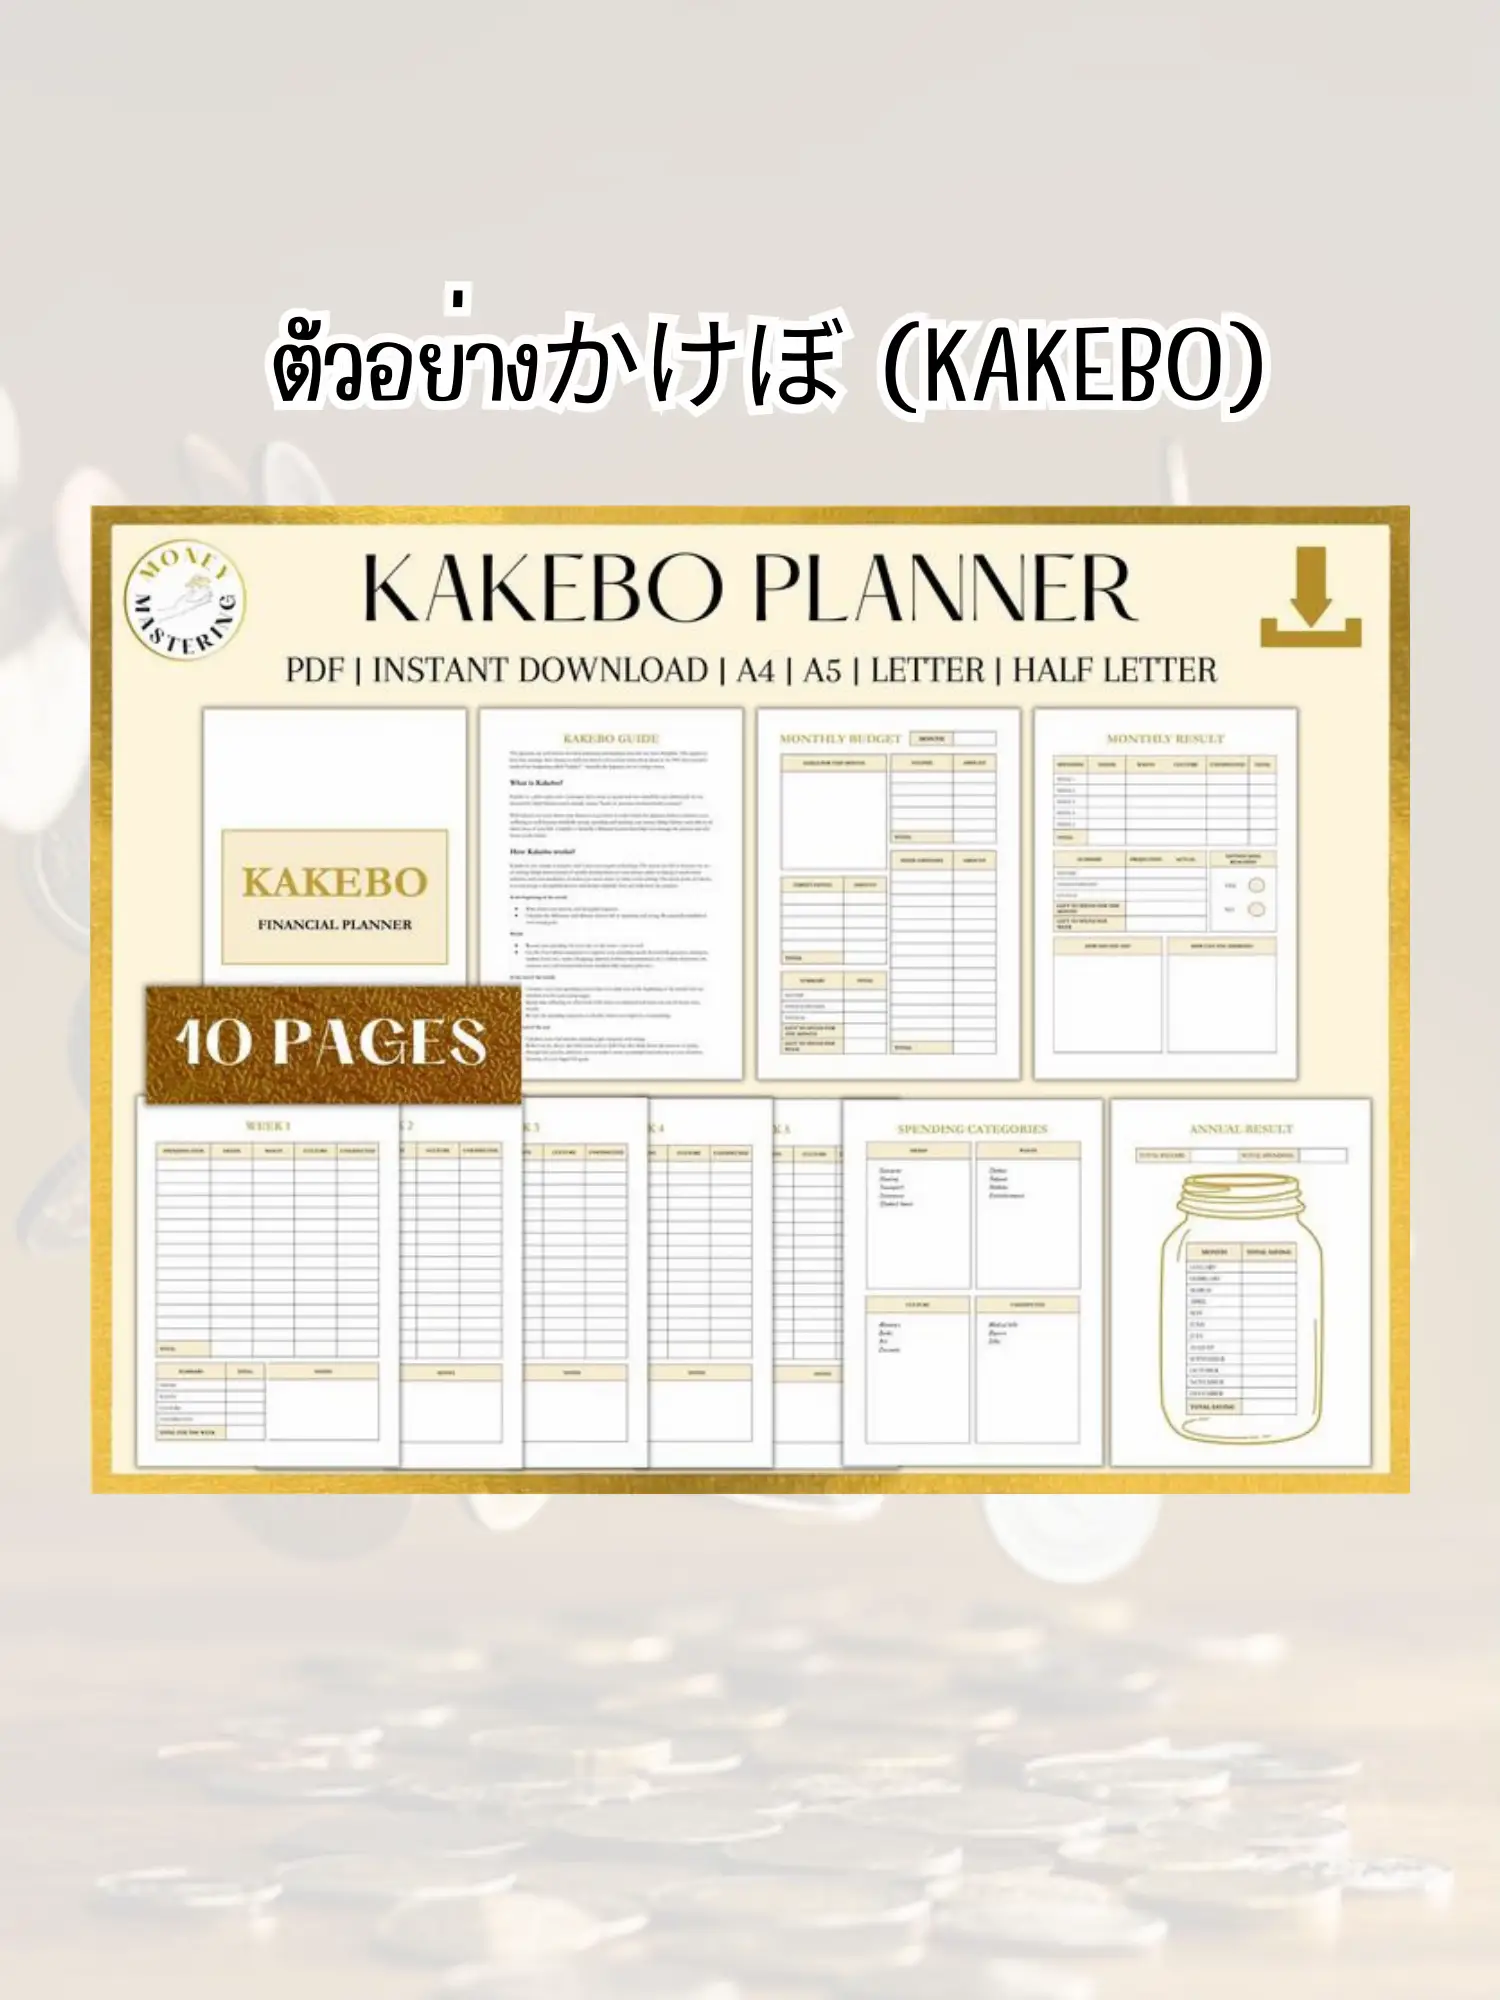 Kakeibo: The Japanese Budgeting Technique that Yields Results